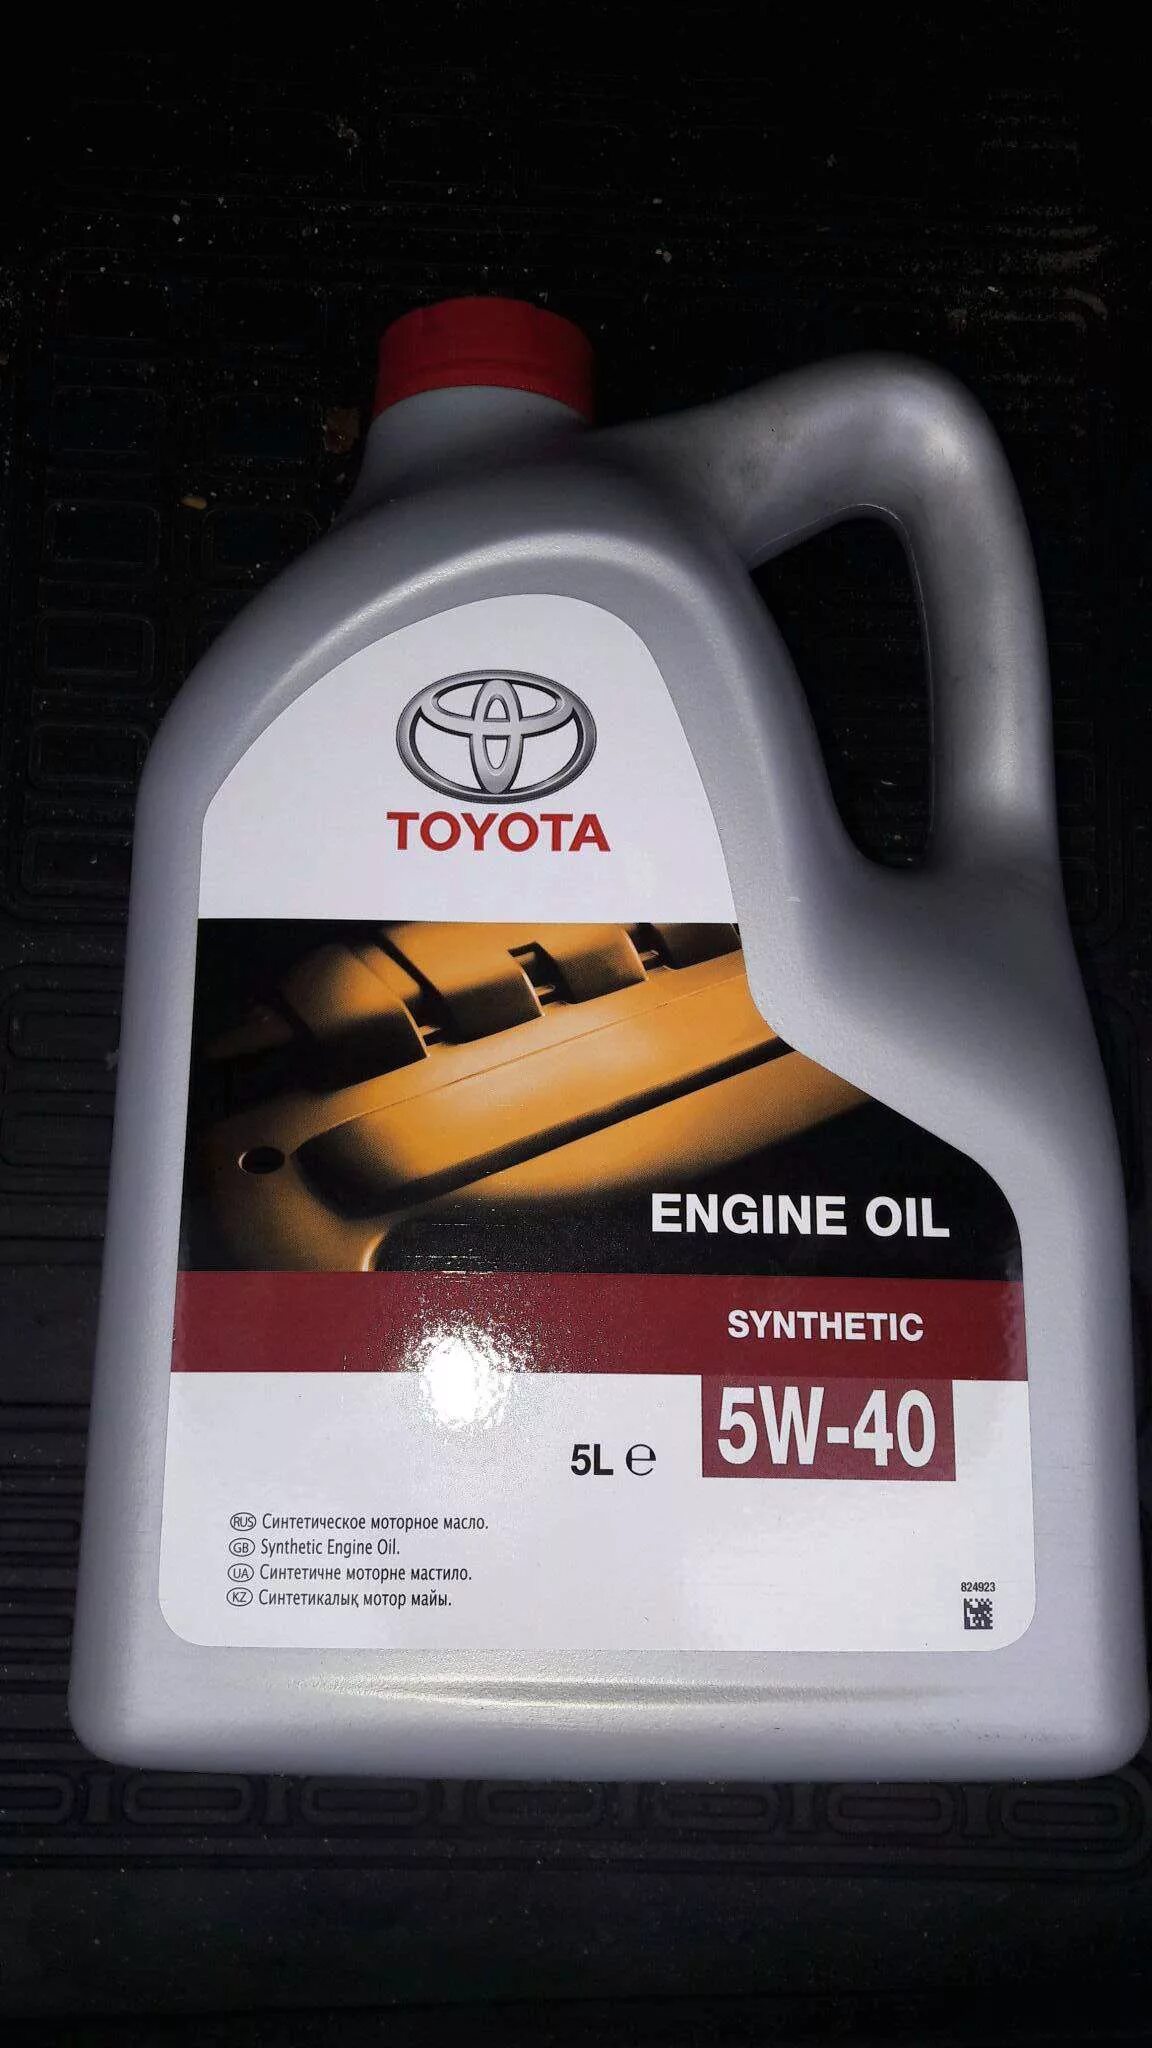 Toyota engine Oil Synthetic 5w-40. Toyota engine Oil 5w40 5л. Toyota 5w-40 08880-80375 5л. Toyota engine Oil 5w-40.